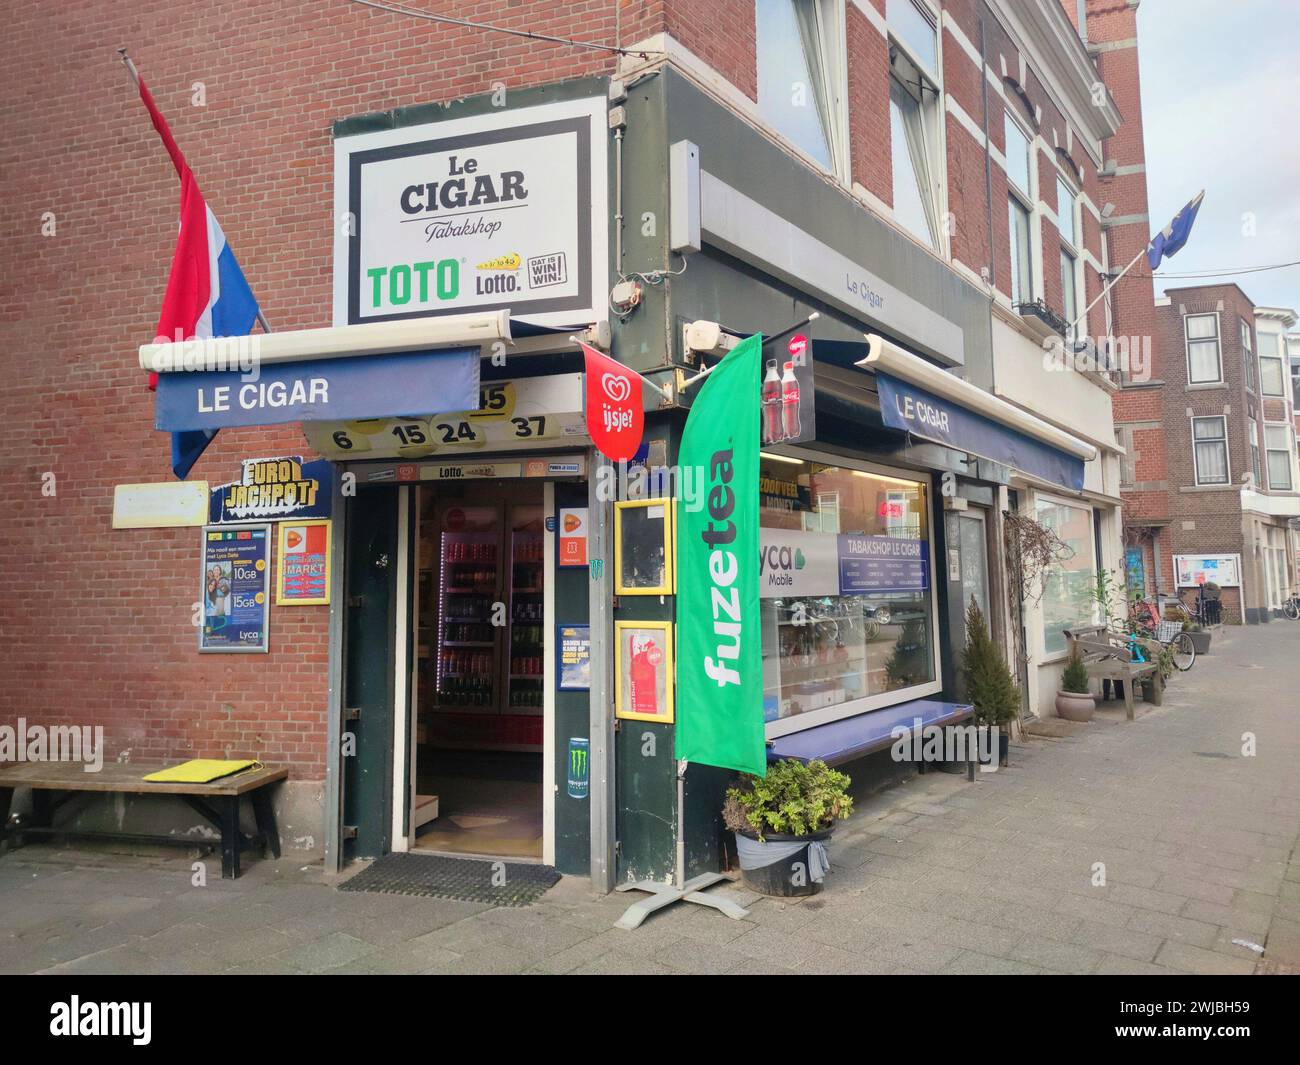 Traditional tobacco shop in a street in the historic part of the fishing town of Scheveningen, near The Hague, the Netherlands. Stock Photo